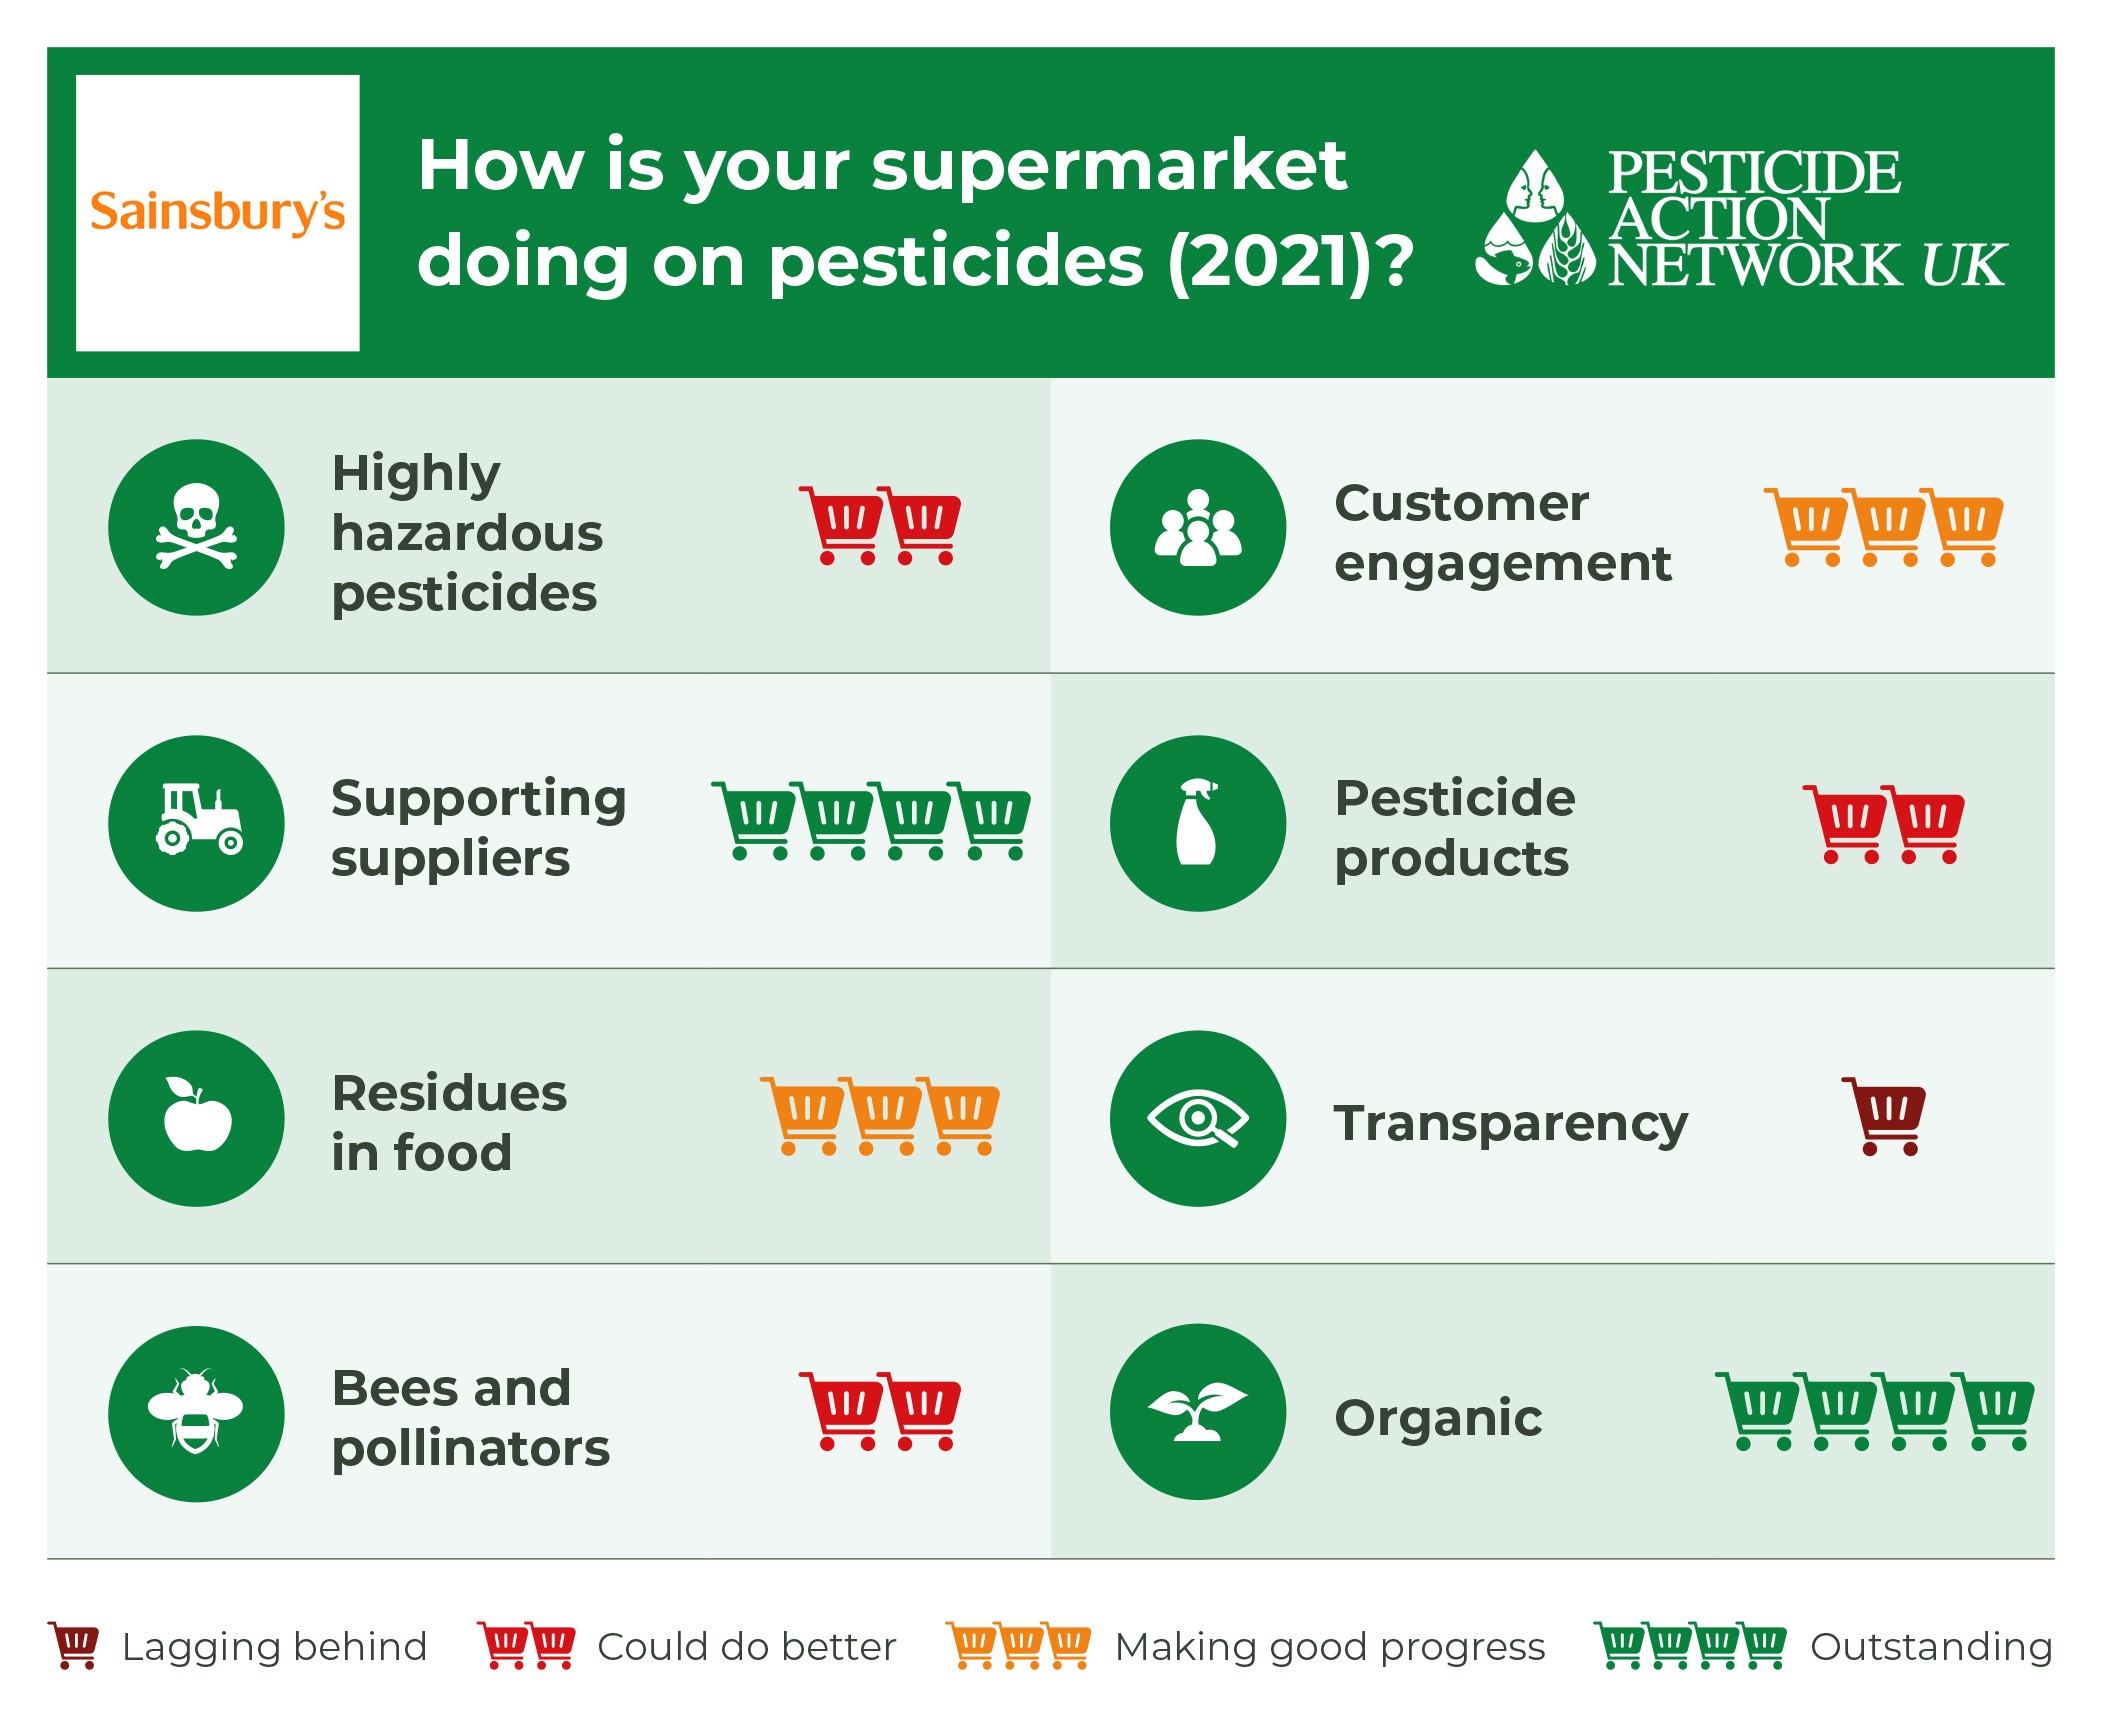 How is Sainsbury's doing on pesticides?